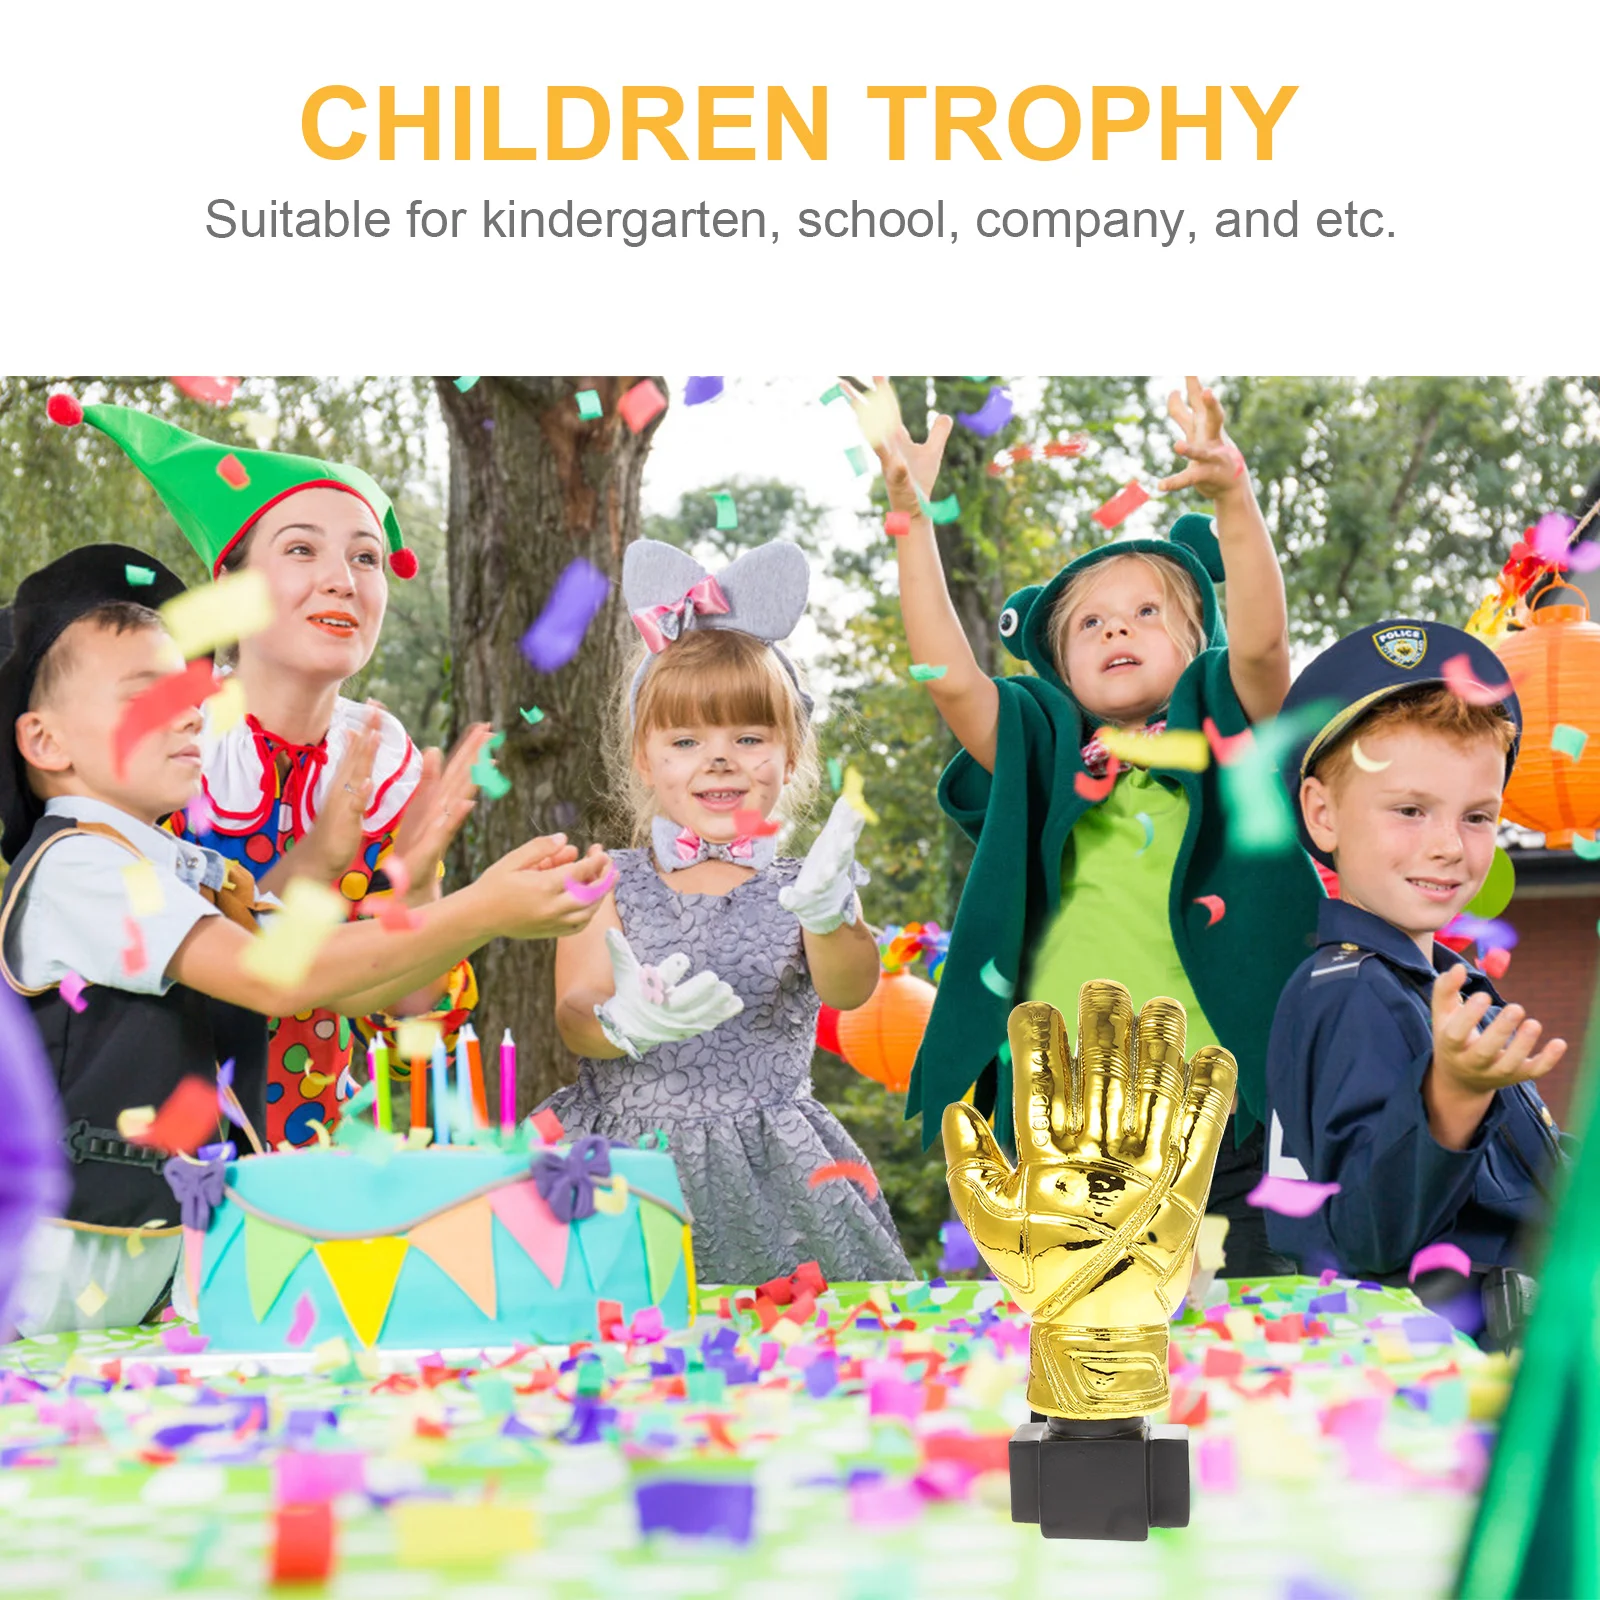 Soccer Kids Gifts Trophy Children's Mittens Achievement Adulting Commemoration Award Prize